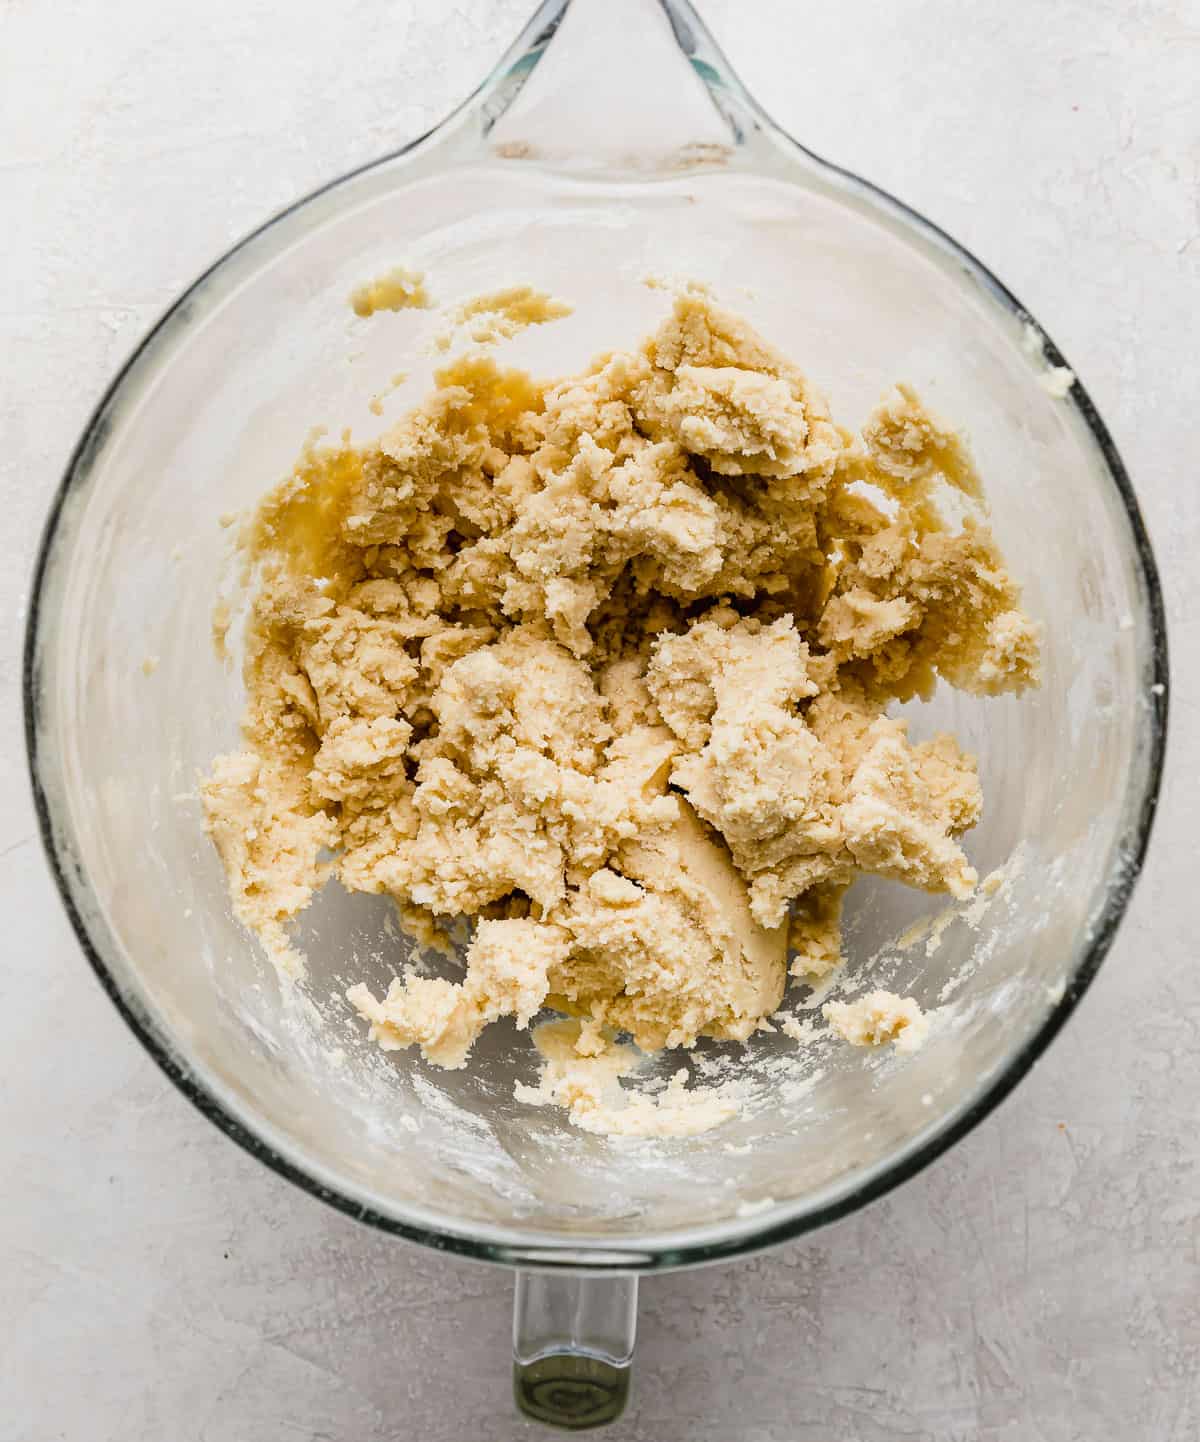 Sugar cookie dough made in one bowl, on a gray background.